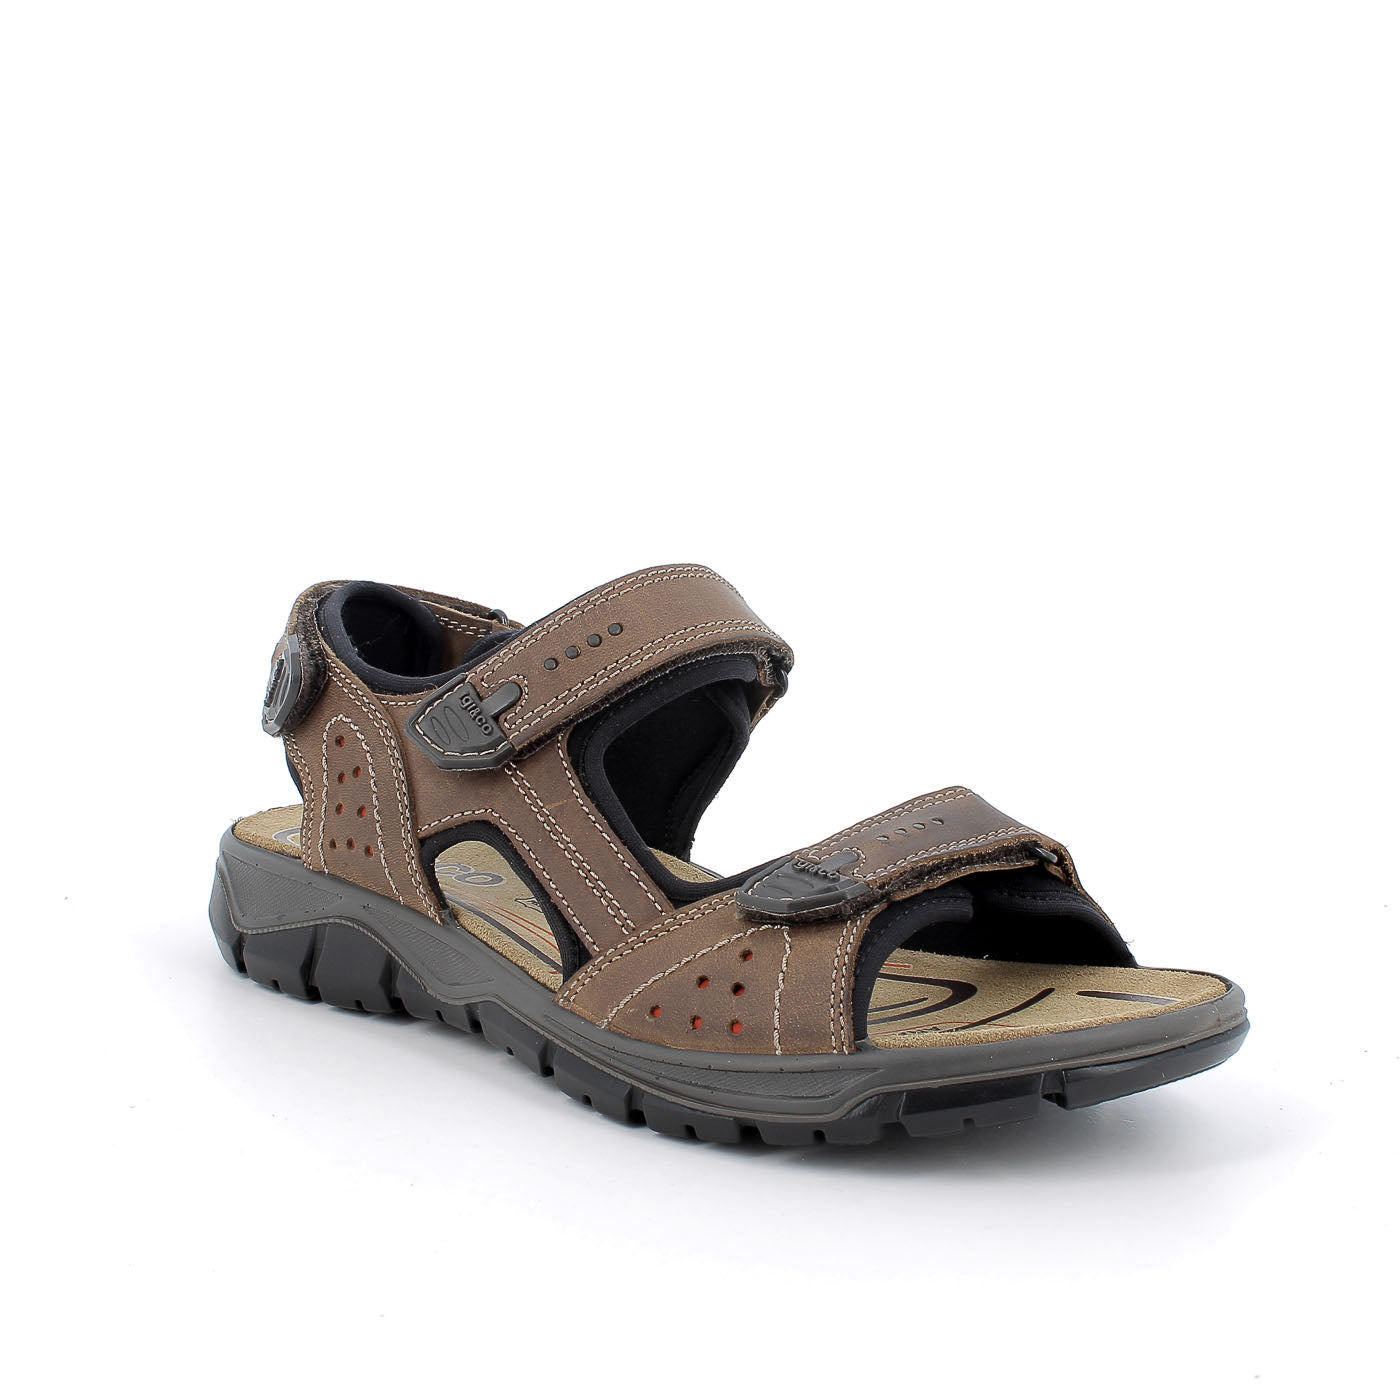 Igi & Co Men's Brown Leather Sandals with Memory Foam and Arch Support